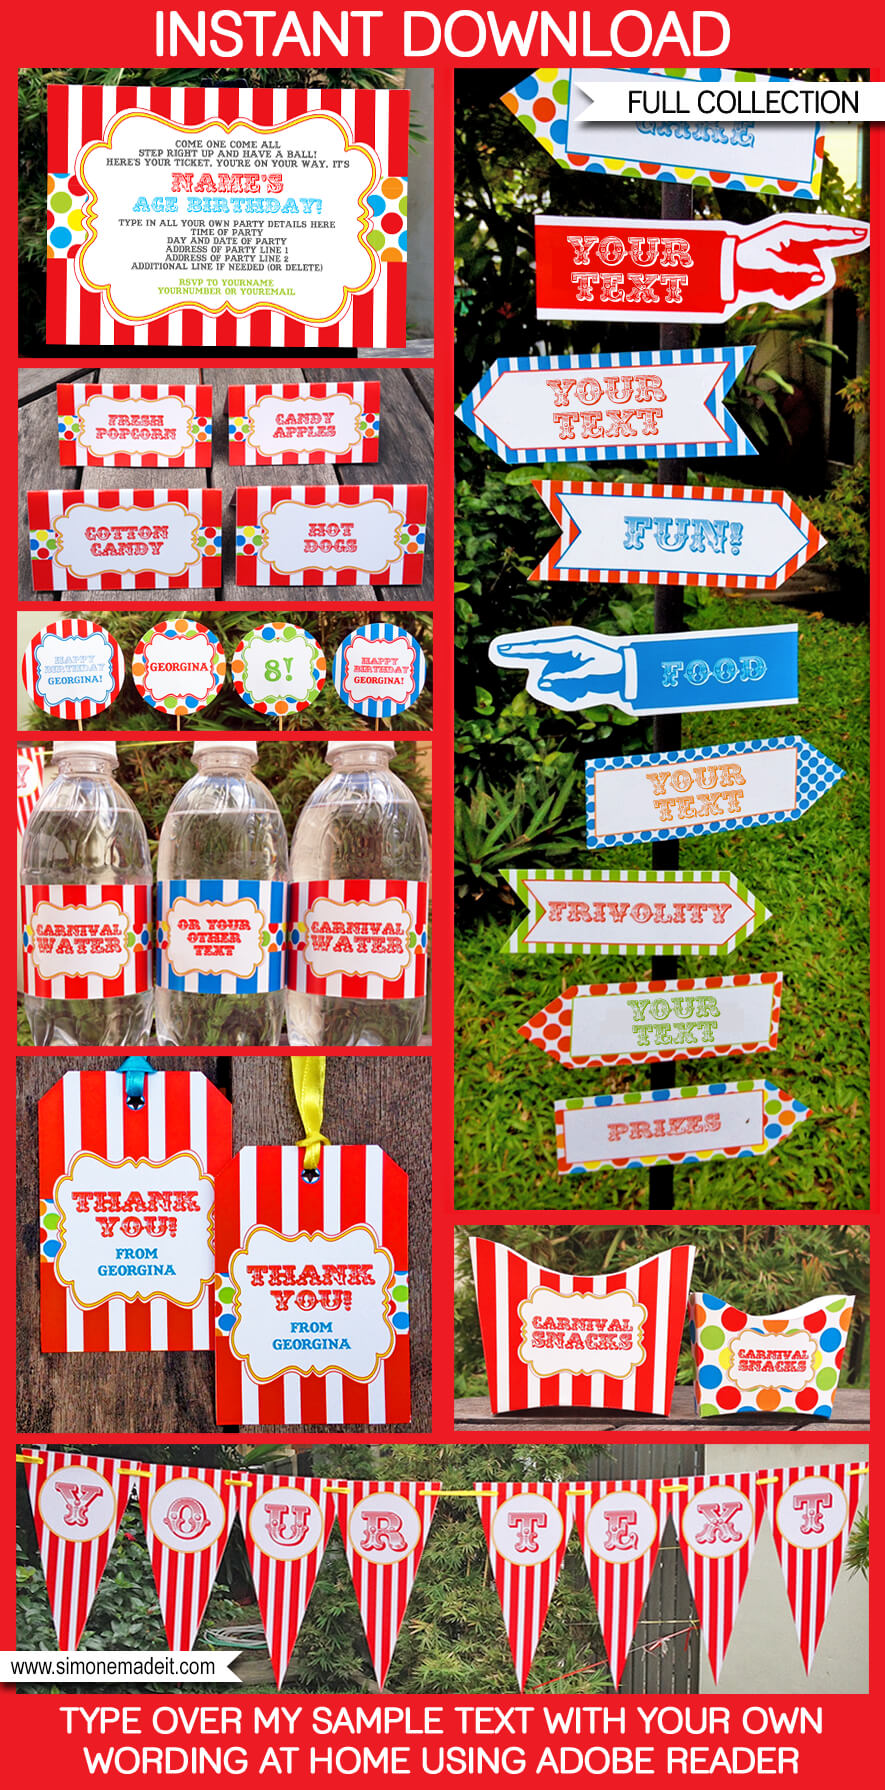 Circus or Carnival Party Printables, Invitations & Decorations | Birthday Party | Editable Theme Templates | INSTANT DOWNLOAD $12.50 via SIMONEmadeit.com